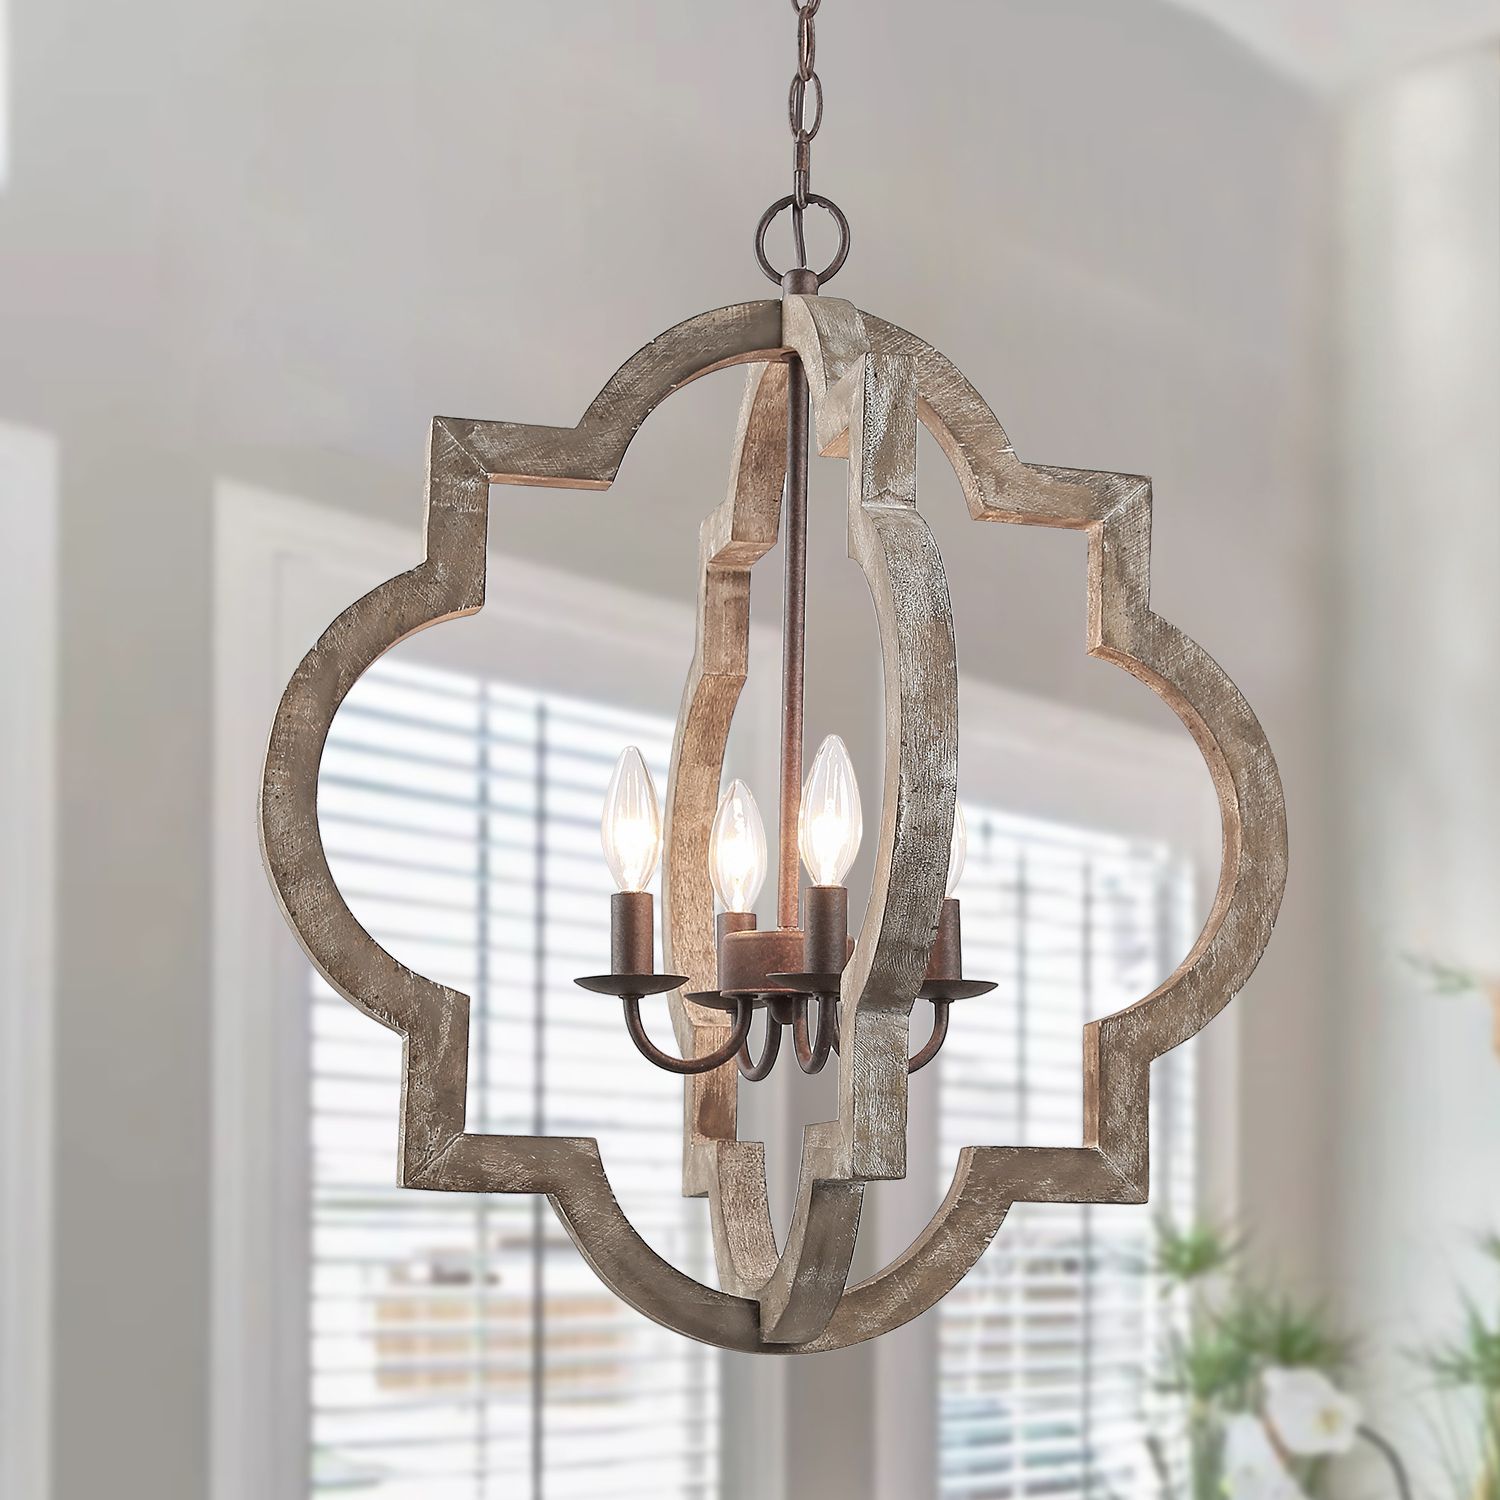 Lnc Farmhouse Lantern Chandelier, Handmade Wood 4 Light Fixtures Hanging  For Dining,living Room – Walmart Throughout Preferred Handcrafted Wood Lantern Chandeliers (View 10 of 10)